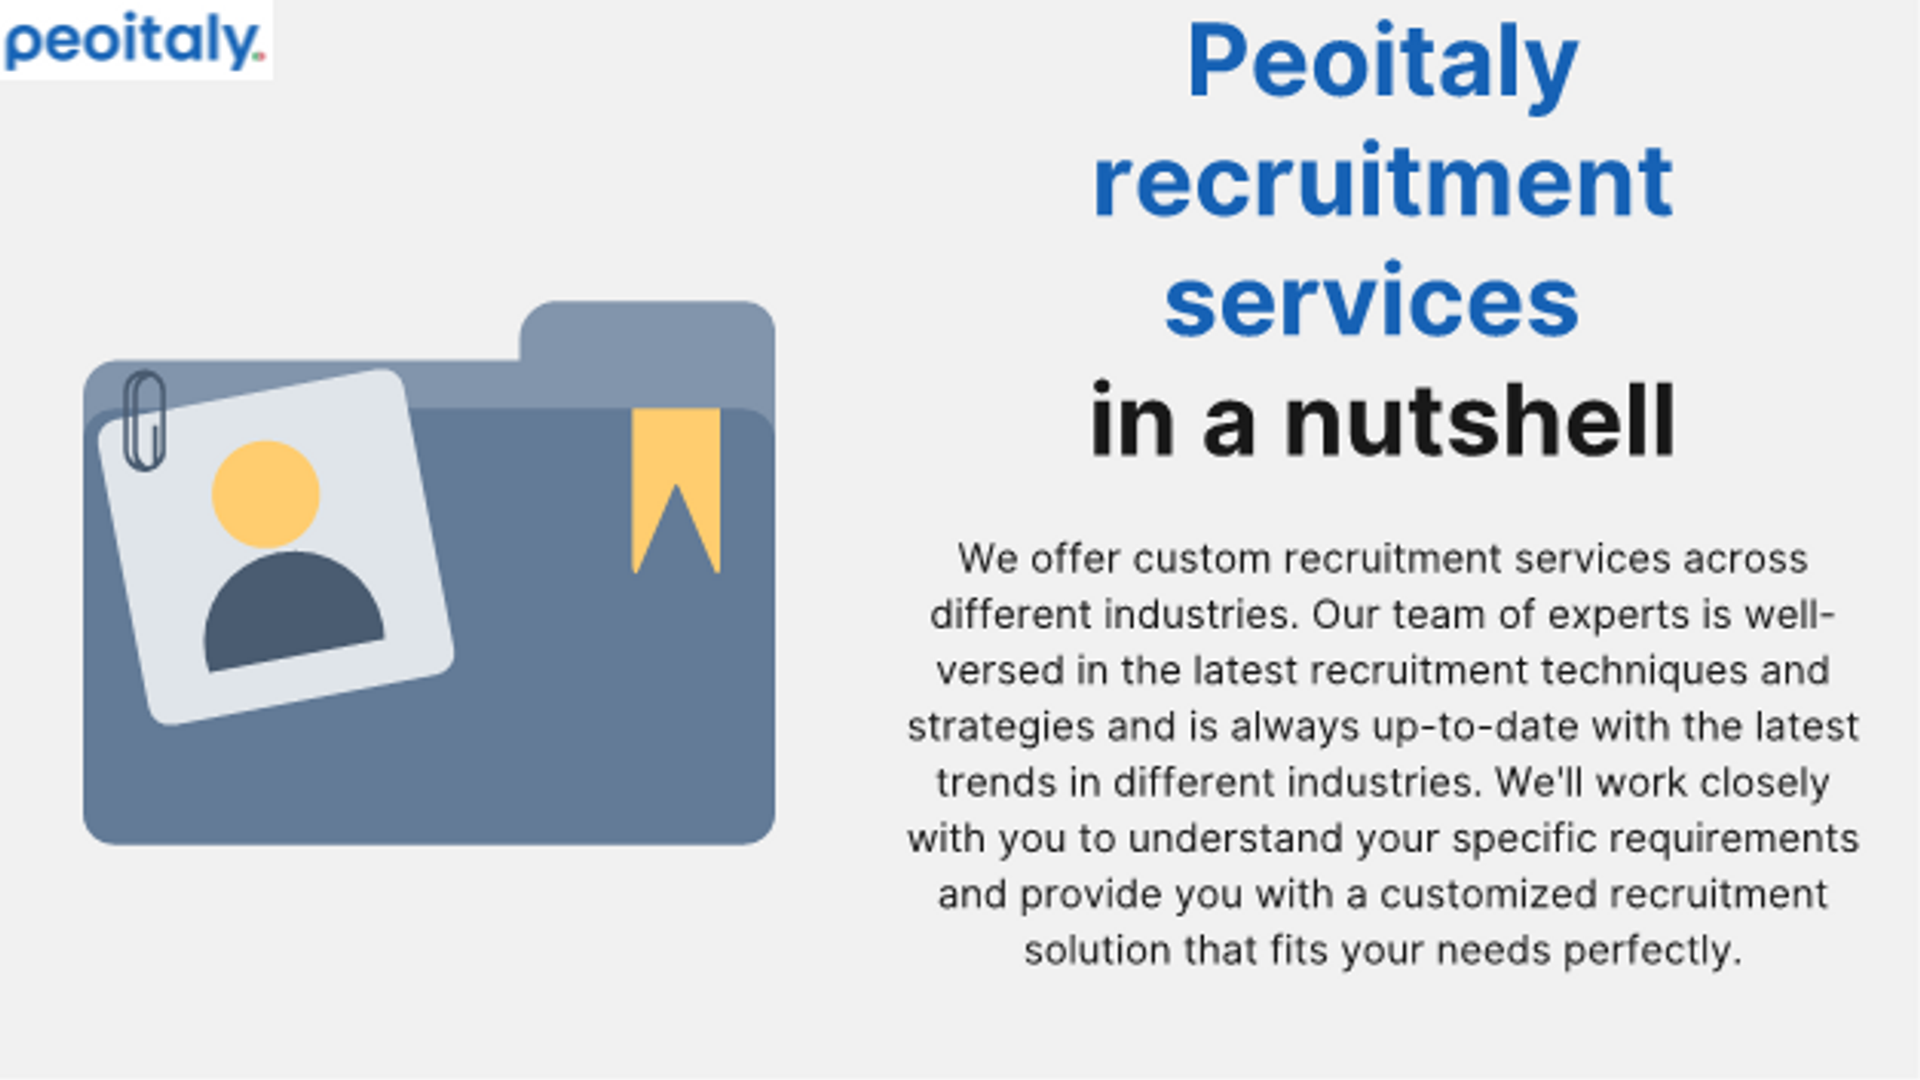 What recruitment services are offered by Peoitaly?